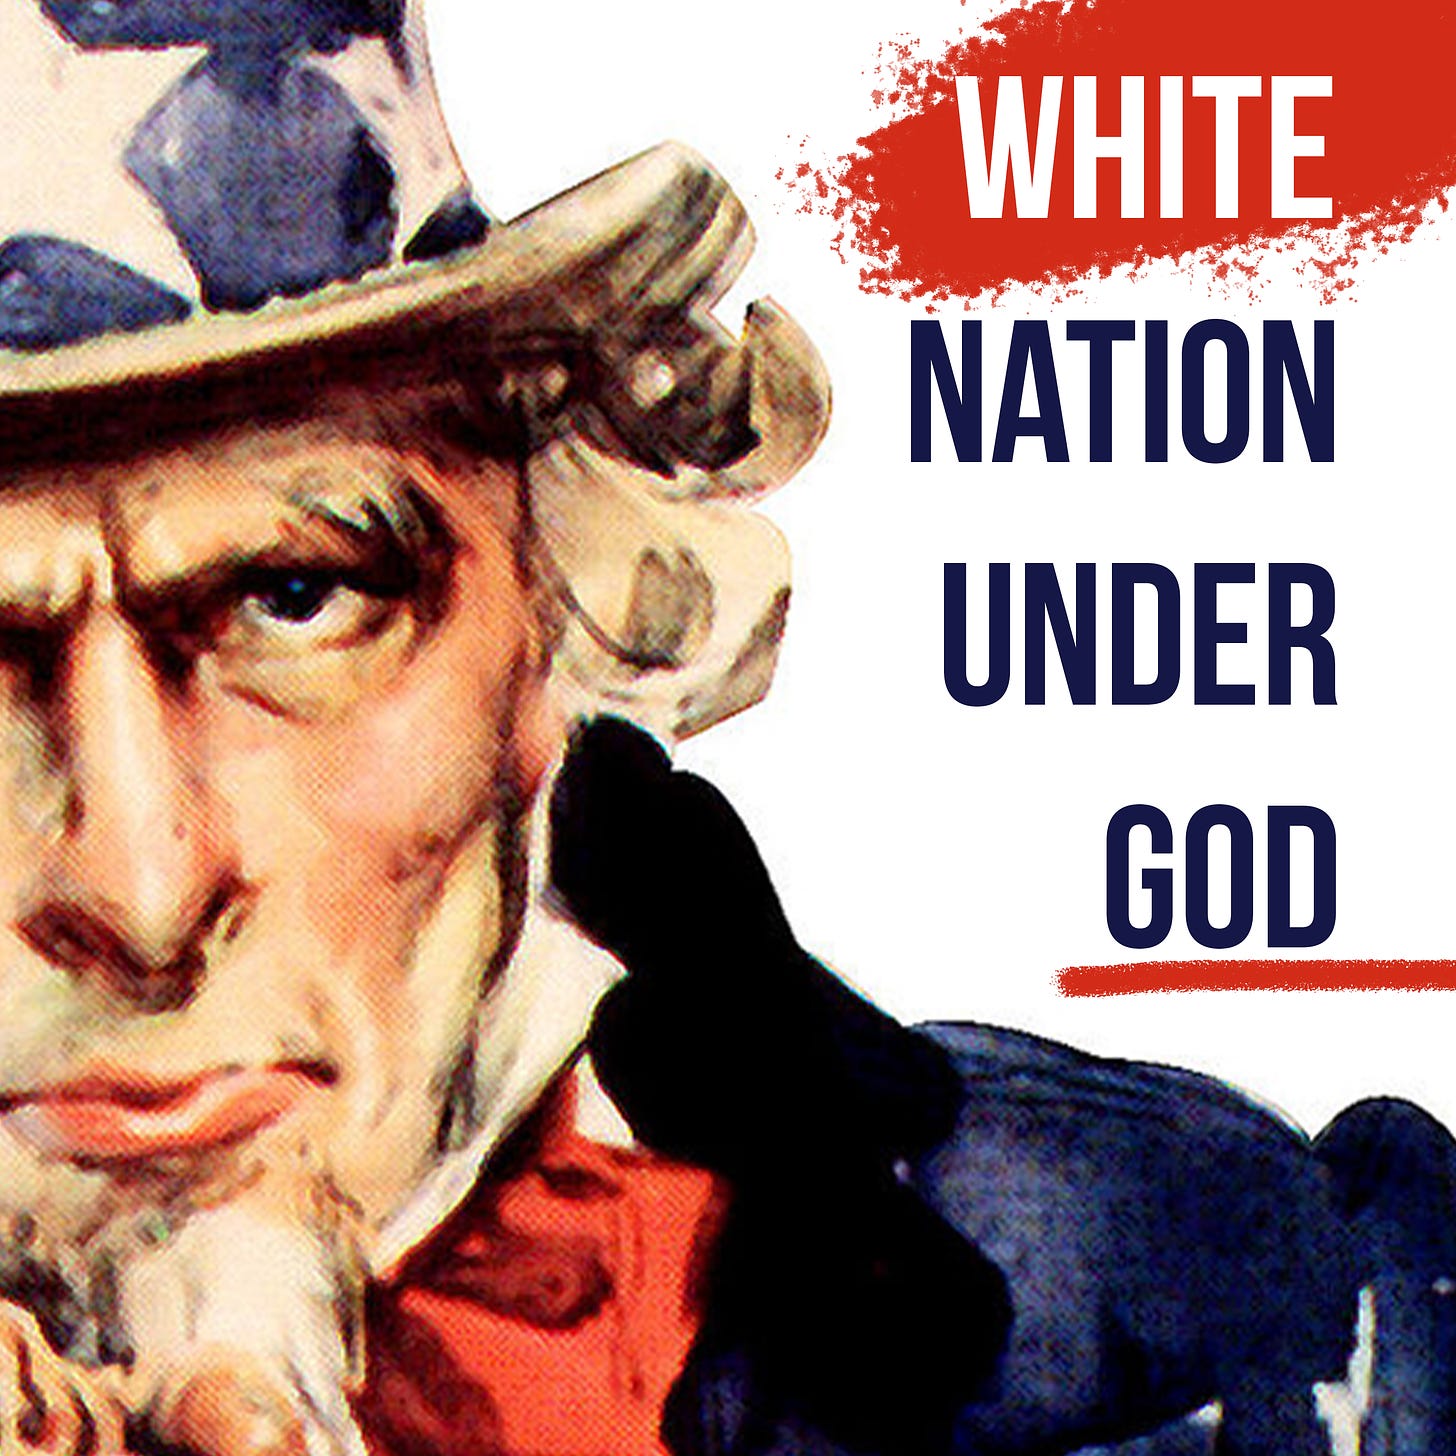 Graphic: Uncle Sam and words "White Nation Under God"